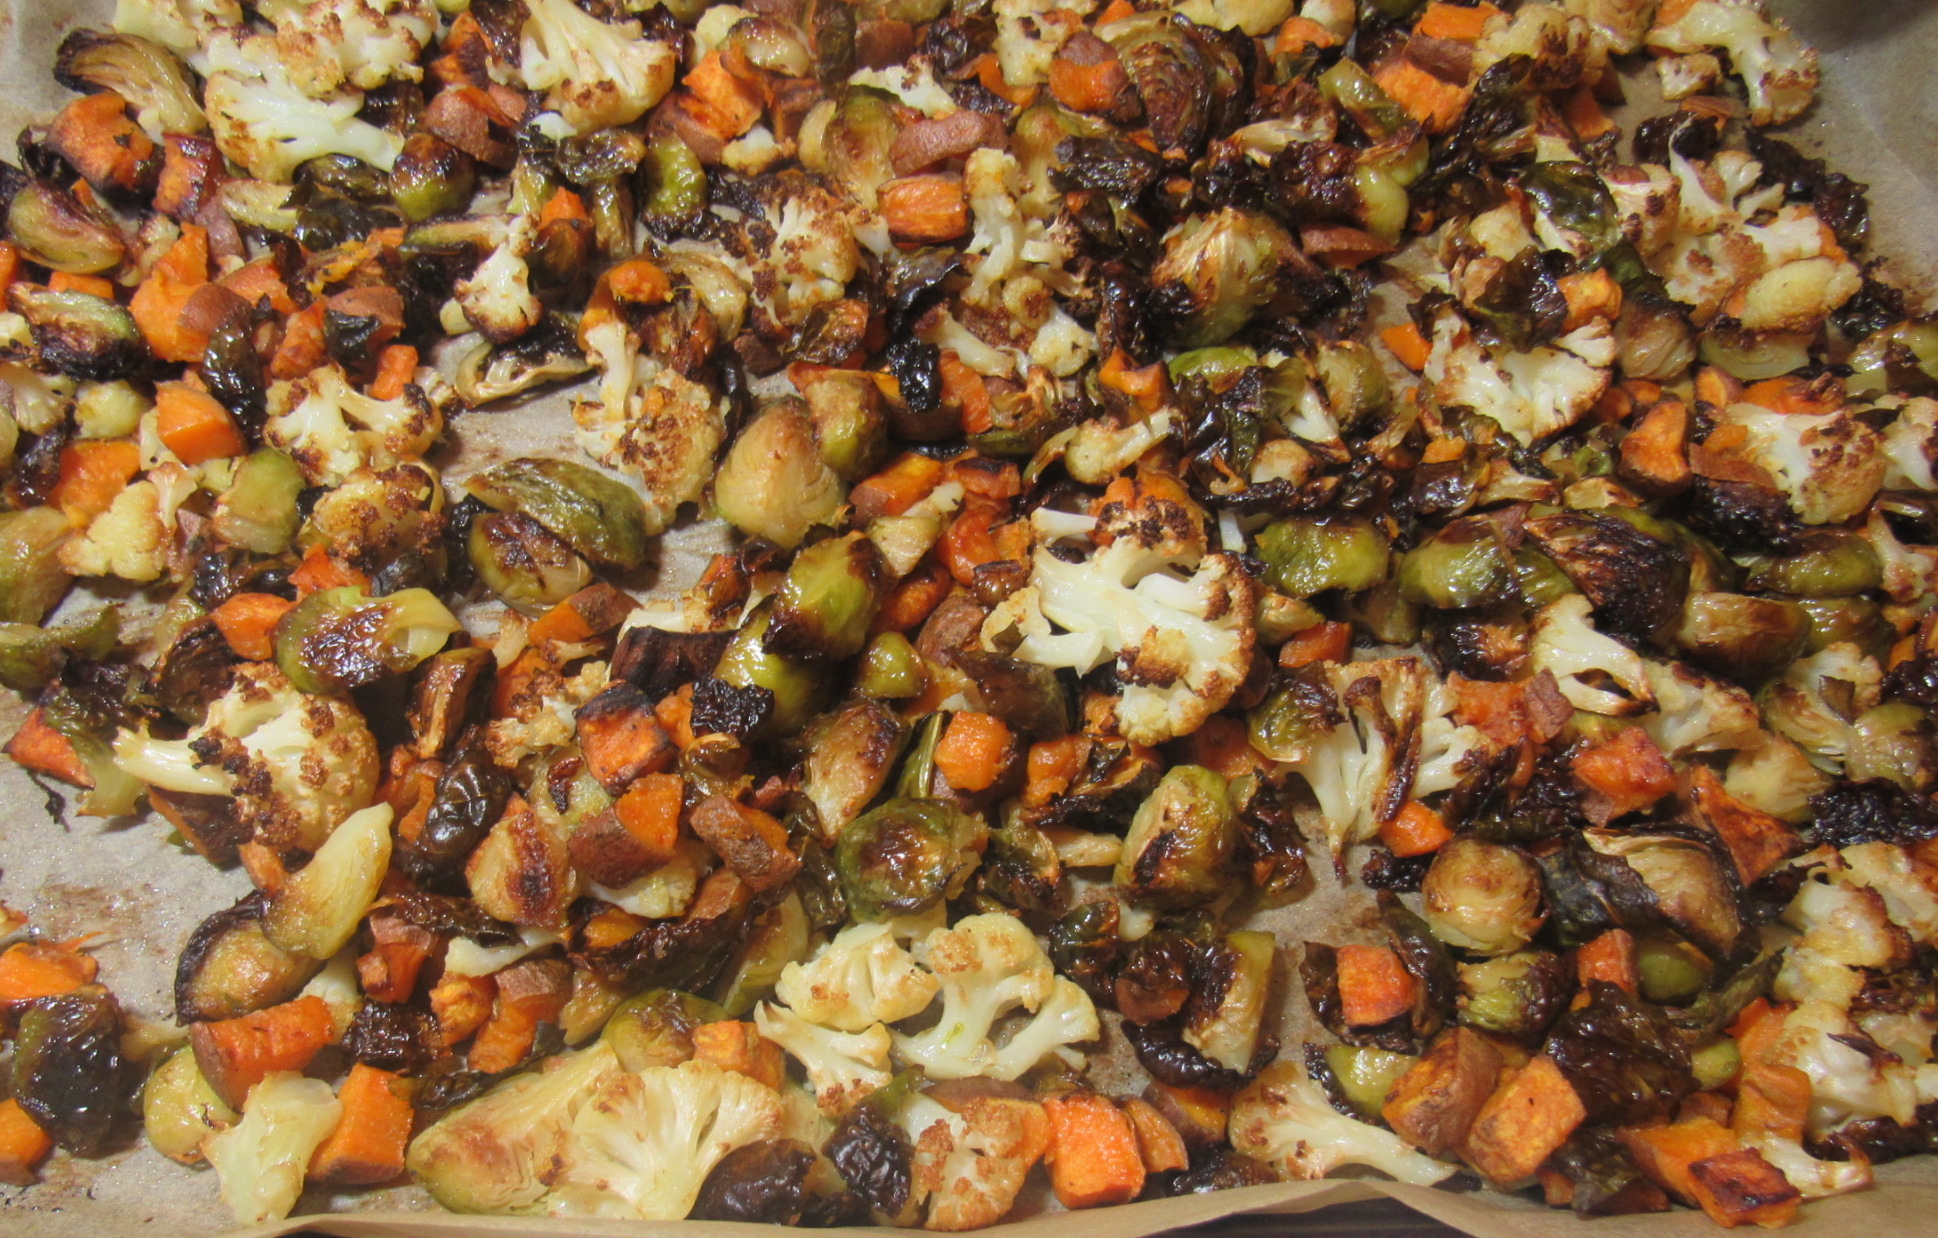 Roasted Cauliflower, Sweet Potatoes, and Brussel Sprouts